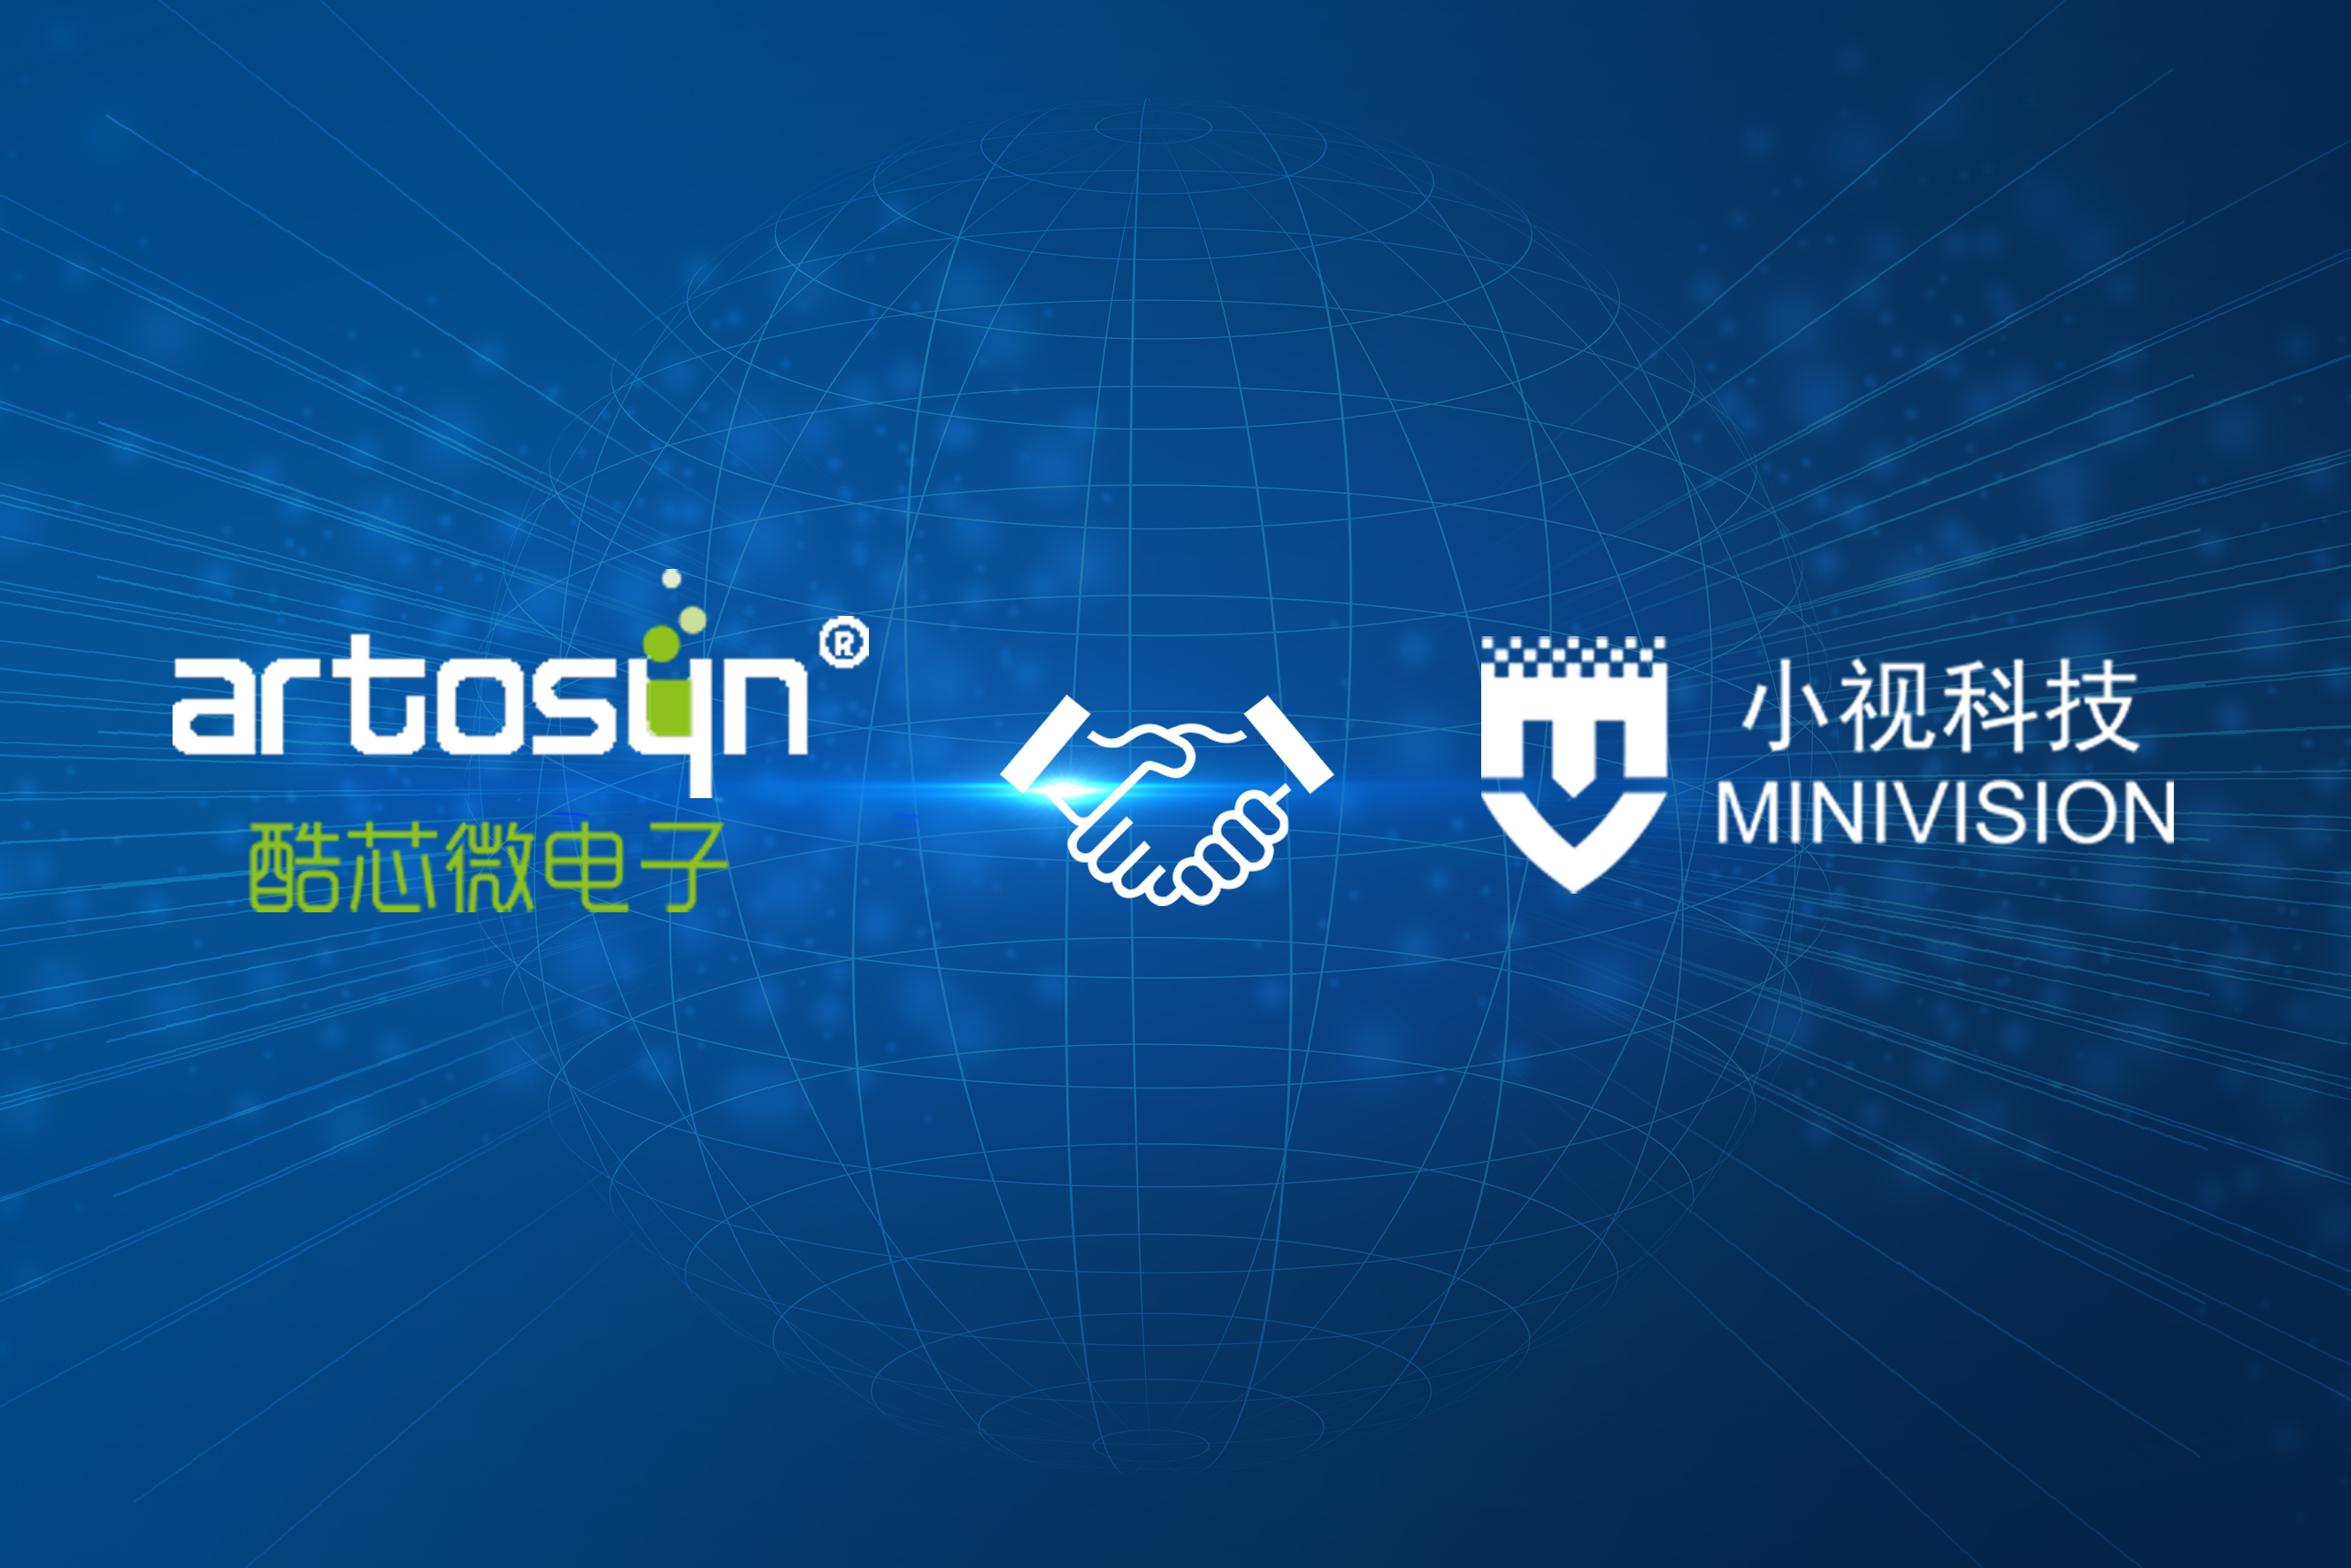 Minivision Technology collaborates with Artosqn Electronics to jointly promote the implementation of AI technology in scenarios